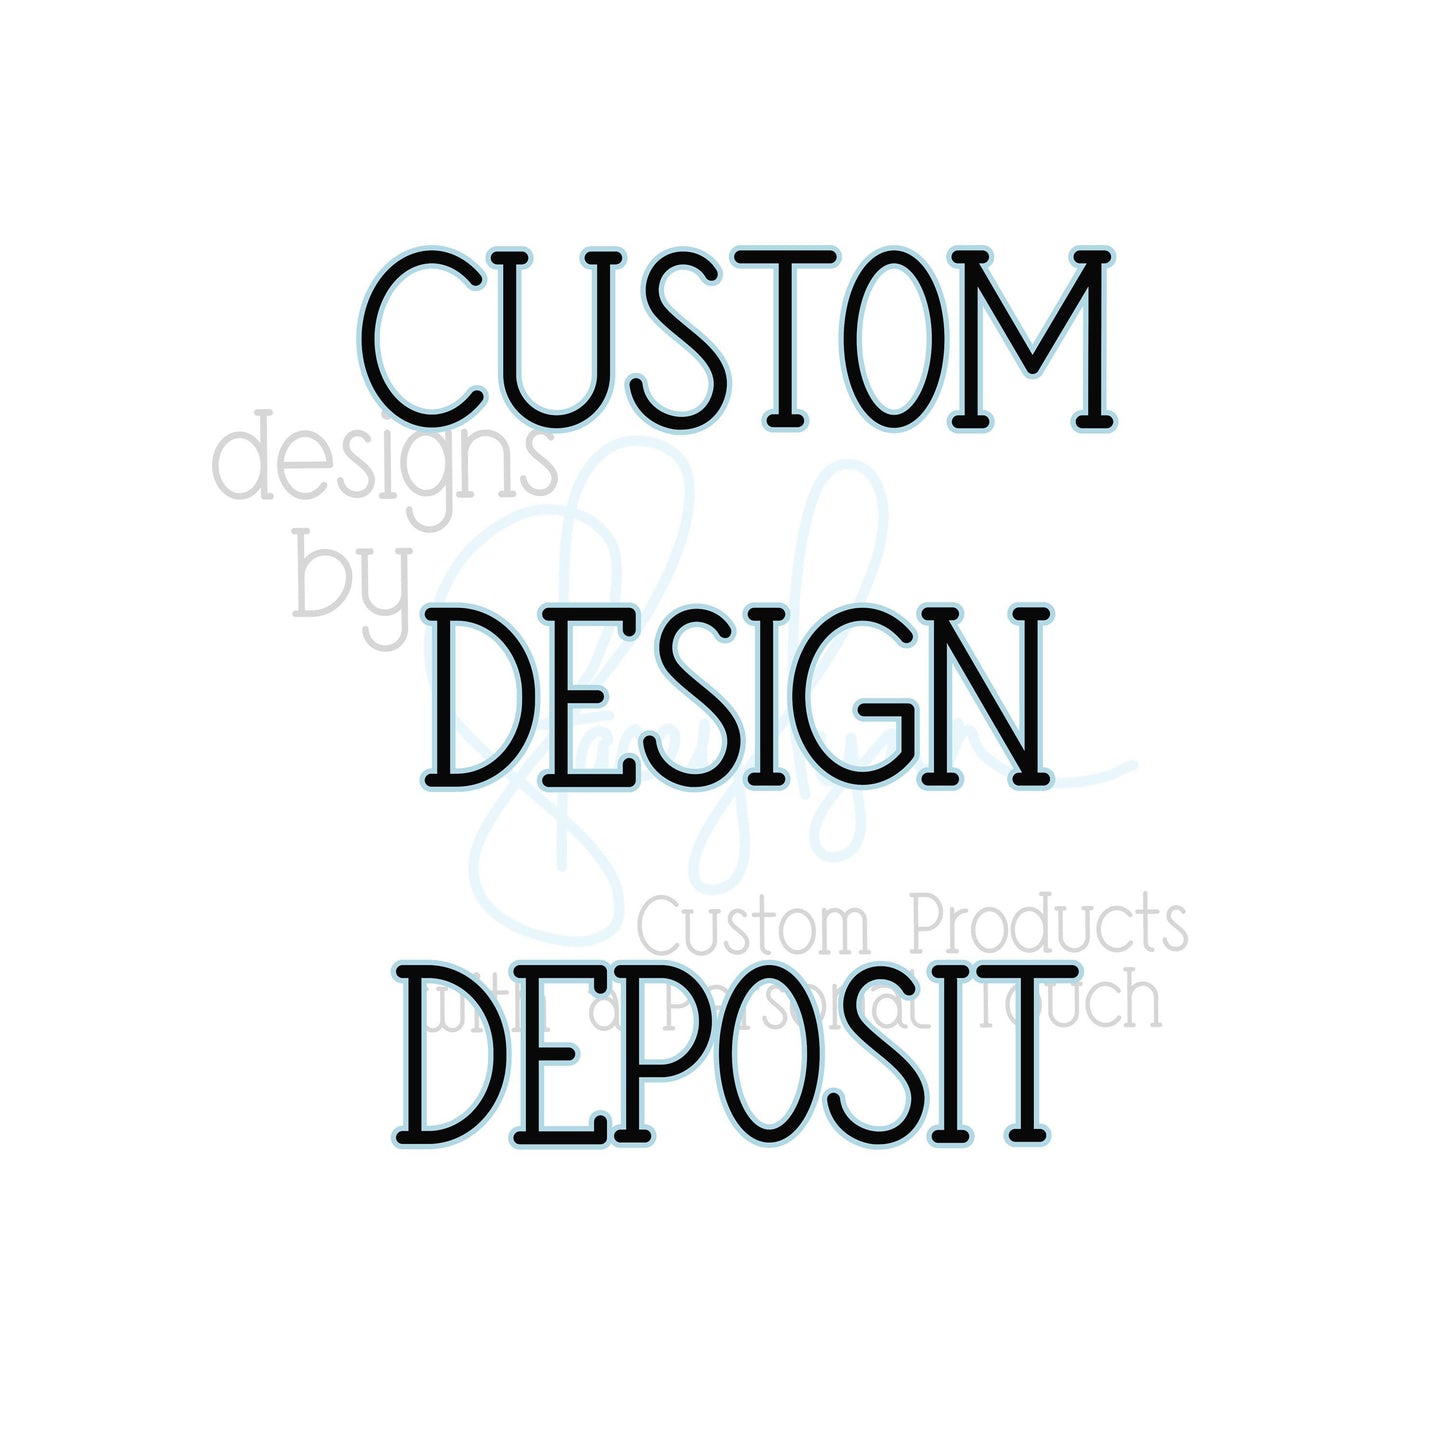 Custom order deposit - for personal, non-commercial orders